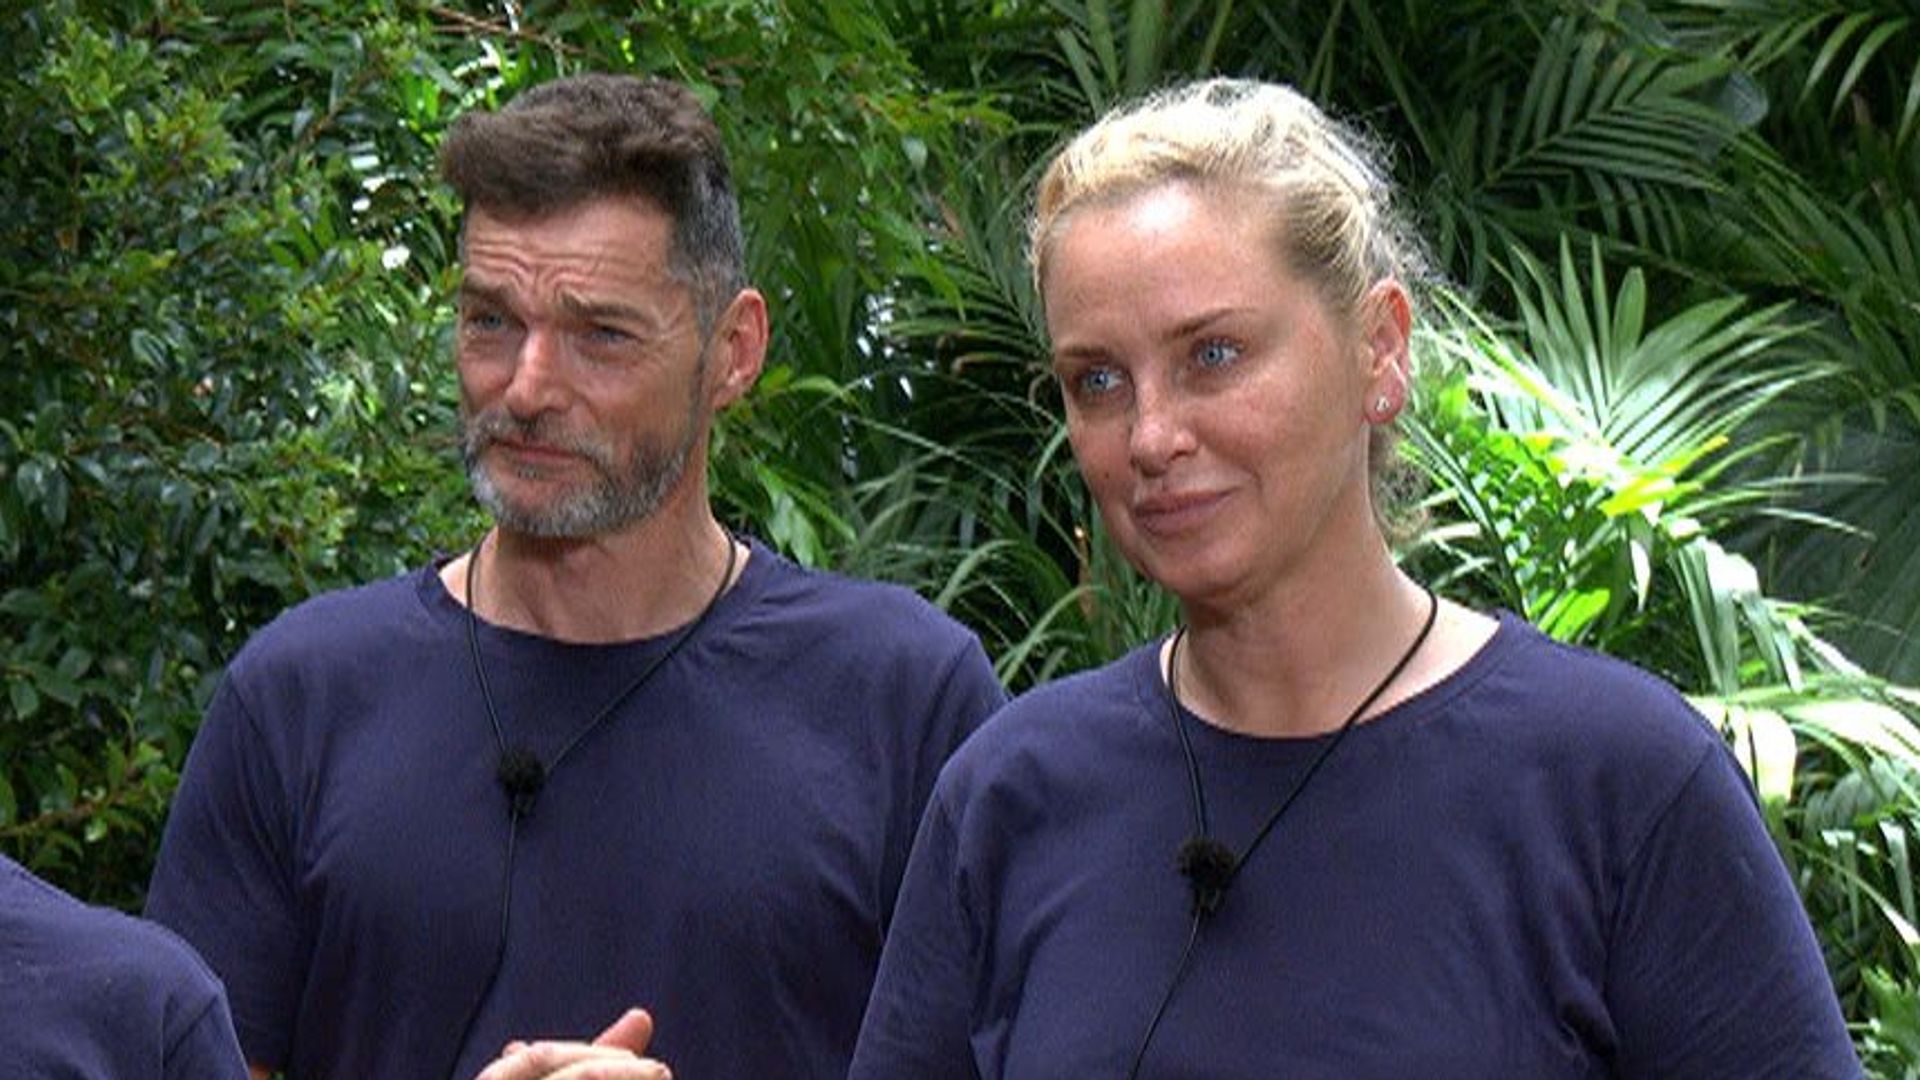 Fred Sirieix and Josie Gibson on I'm a Celebrity... Get Me Out of Here!